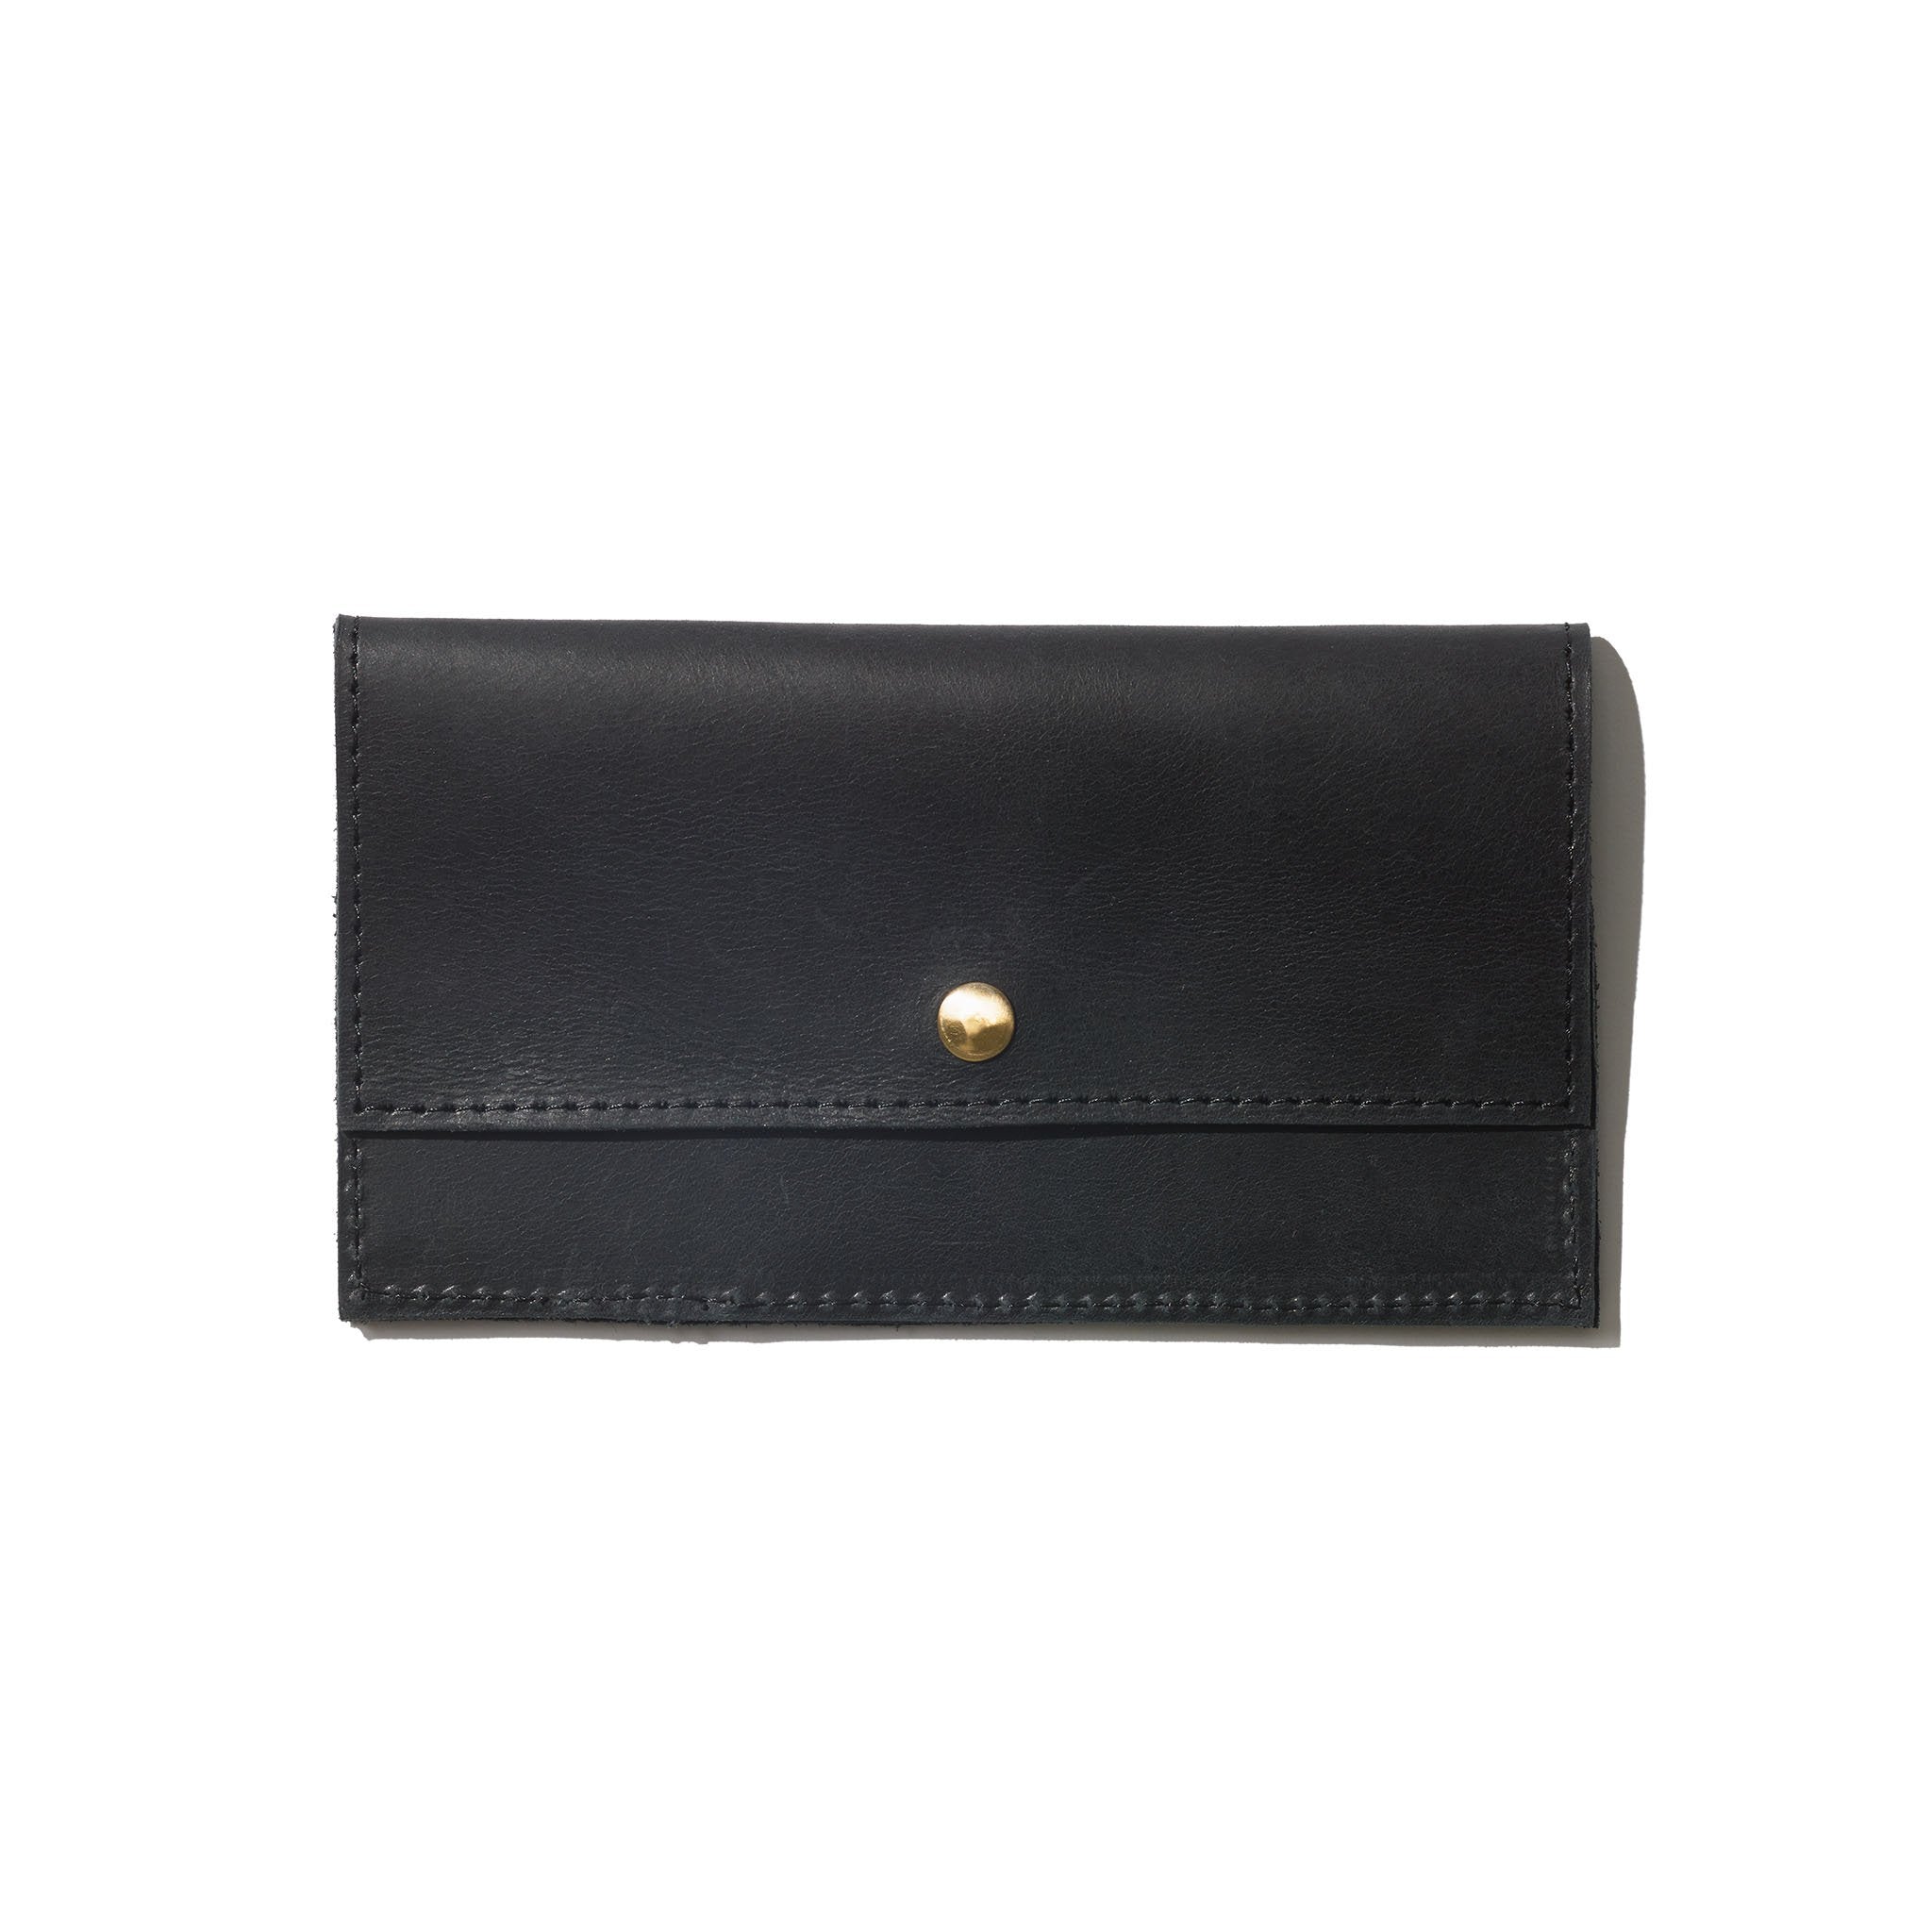 A black wallet handcrafted from sustainable leather featuring a brass snap button closure and a minimalist design.